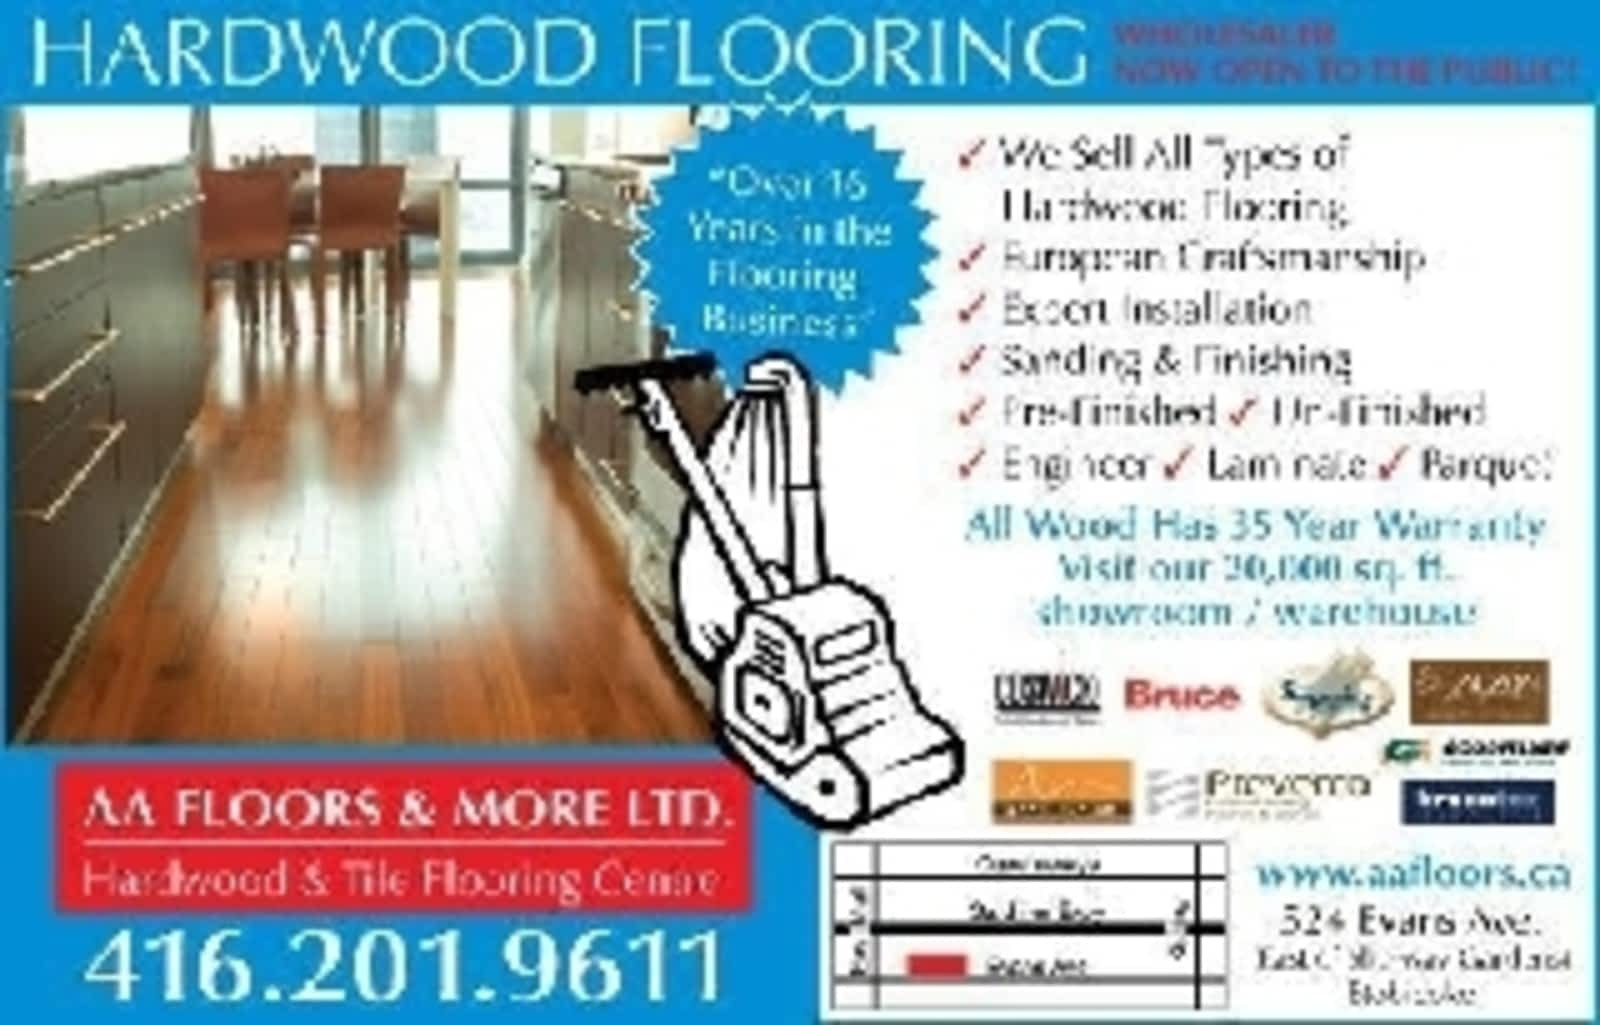 24 Fashionable Hardwood Flooring north York 2024 free download hardwood flooring north york of aa floors and more opening hours 524 evans ave etobicoke on regarding aa floors and more 8